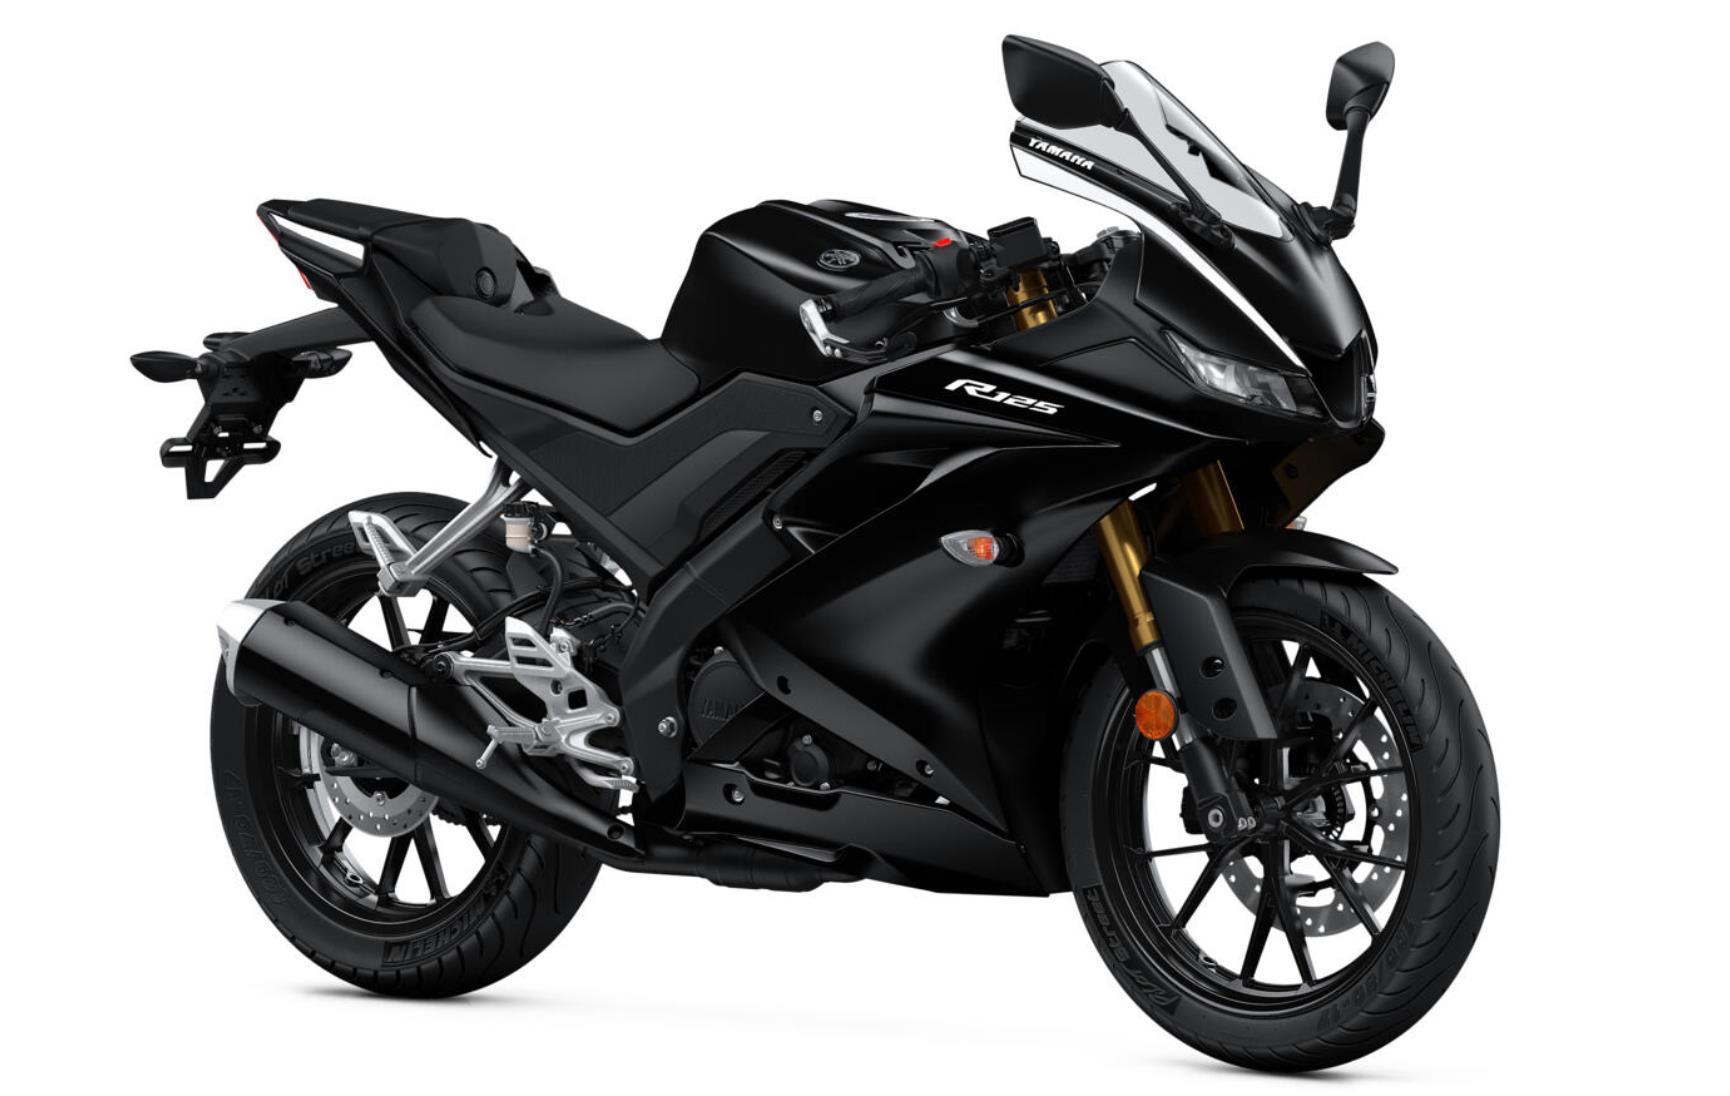 2022 Yamaha YZFR125 Specifications and Expected Price in India